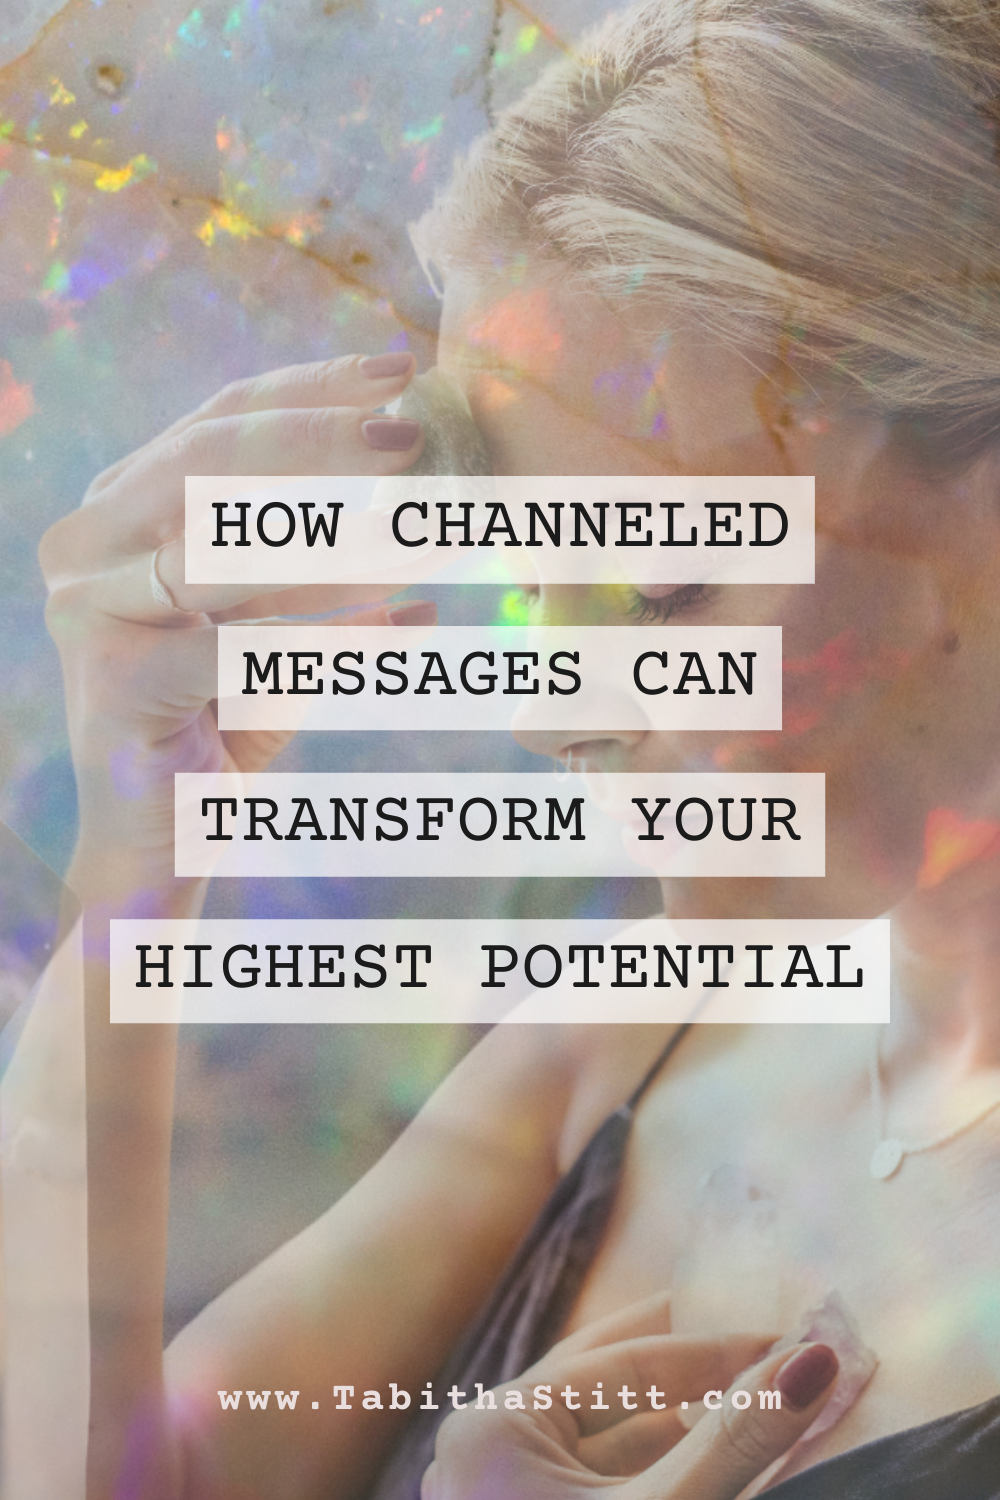 How Channeled Messages Can Transform Your Highest Potential with Tabitha Stitt, The Self-Help Psychic and with crystals to emphasize natural power